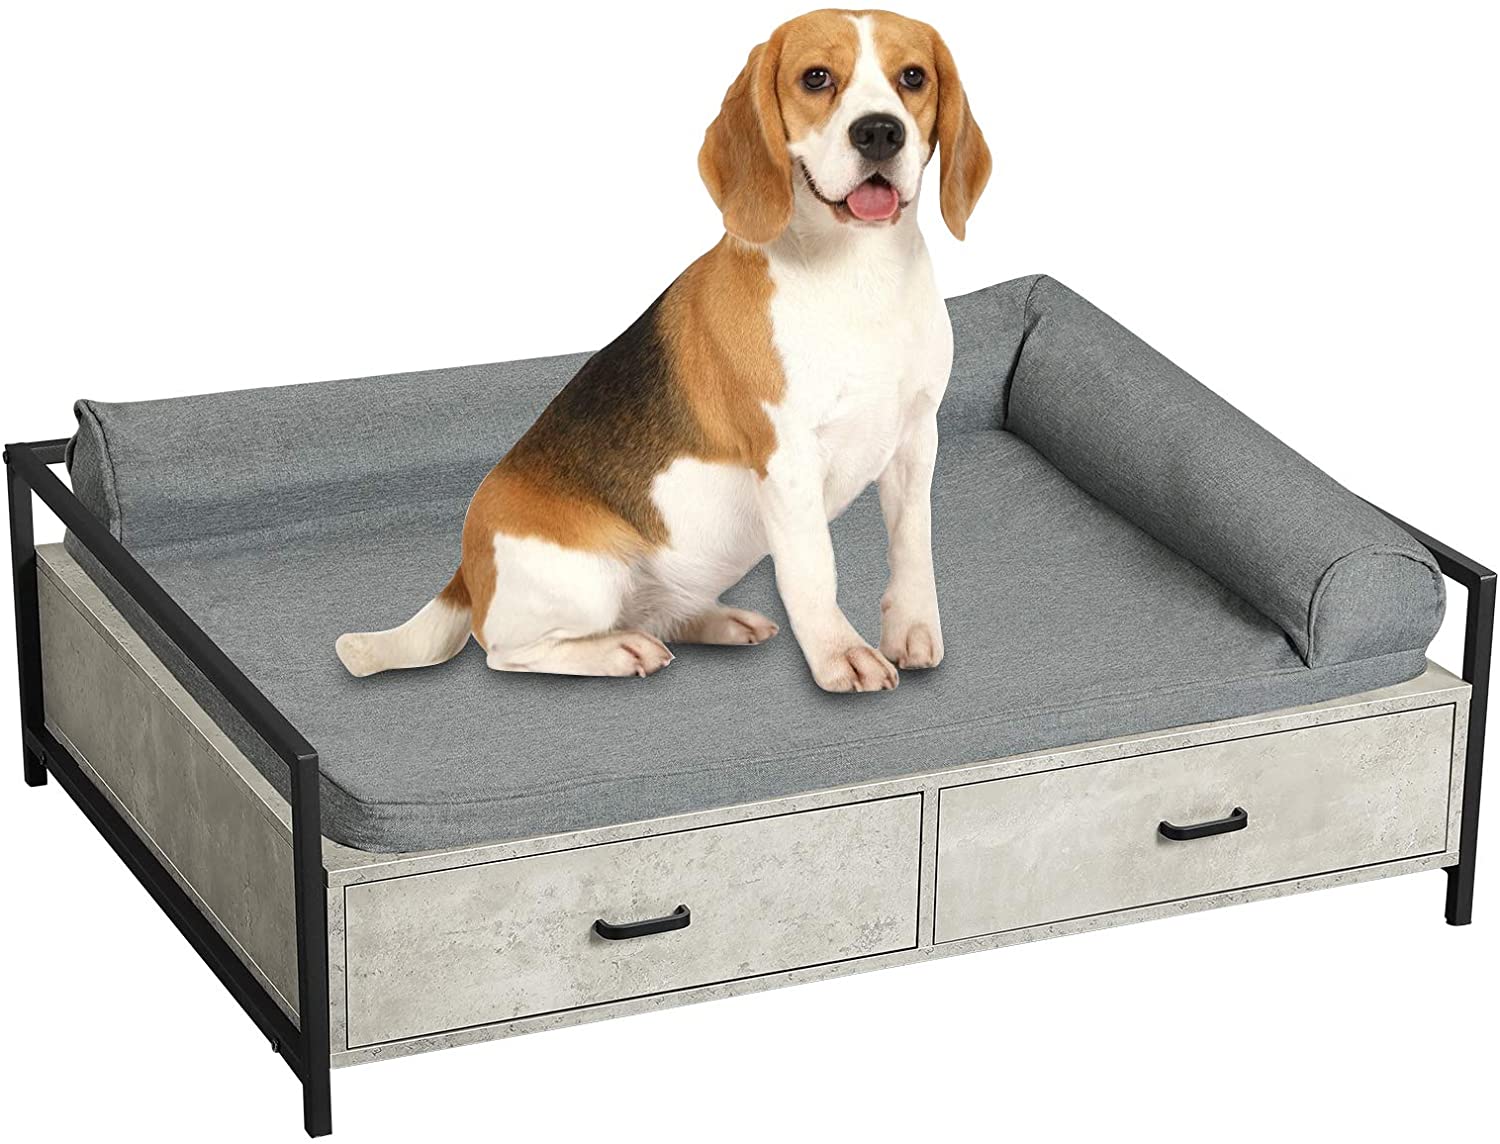 MSmask Pet Dog Bed with Drawer